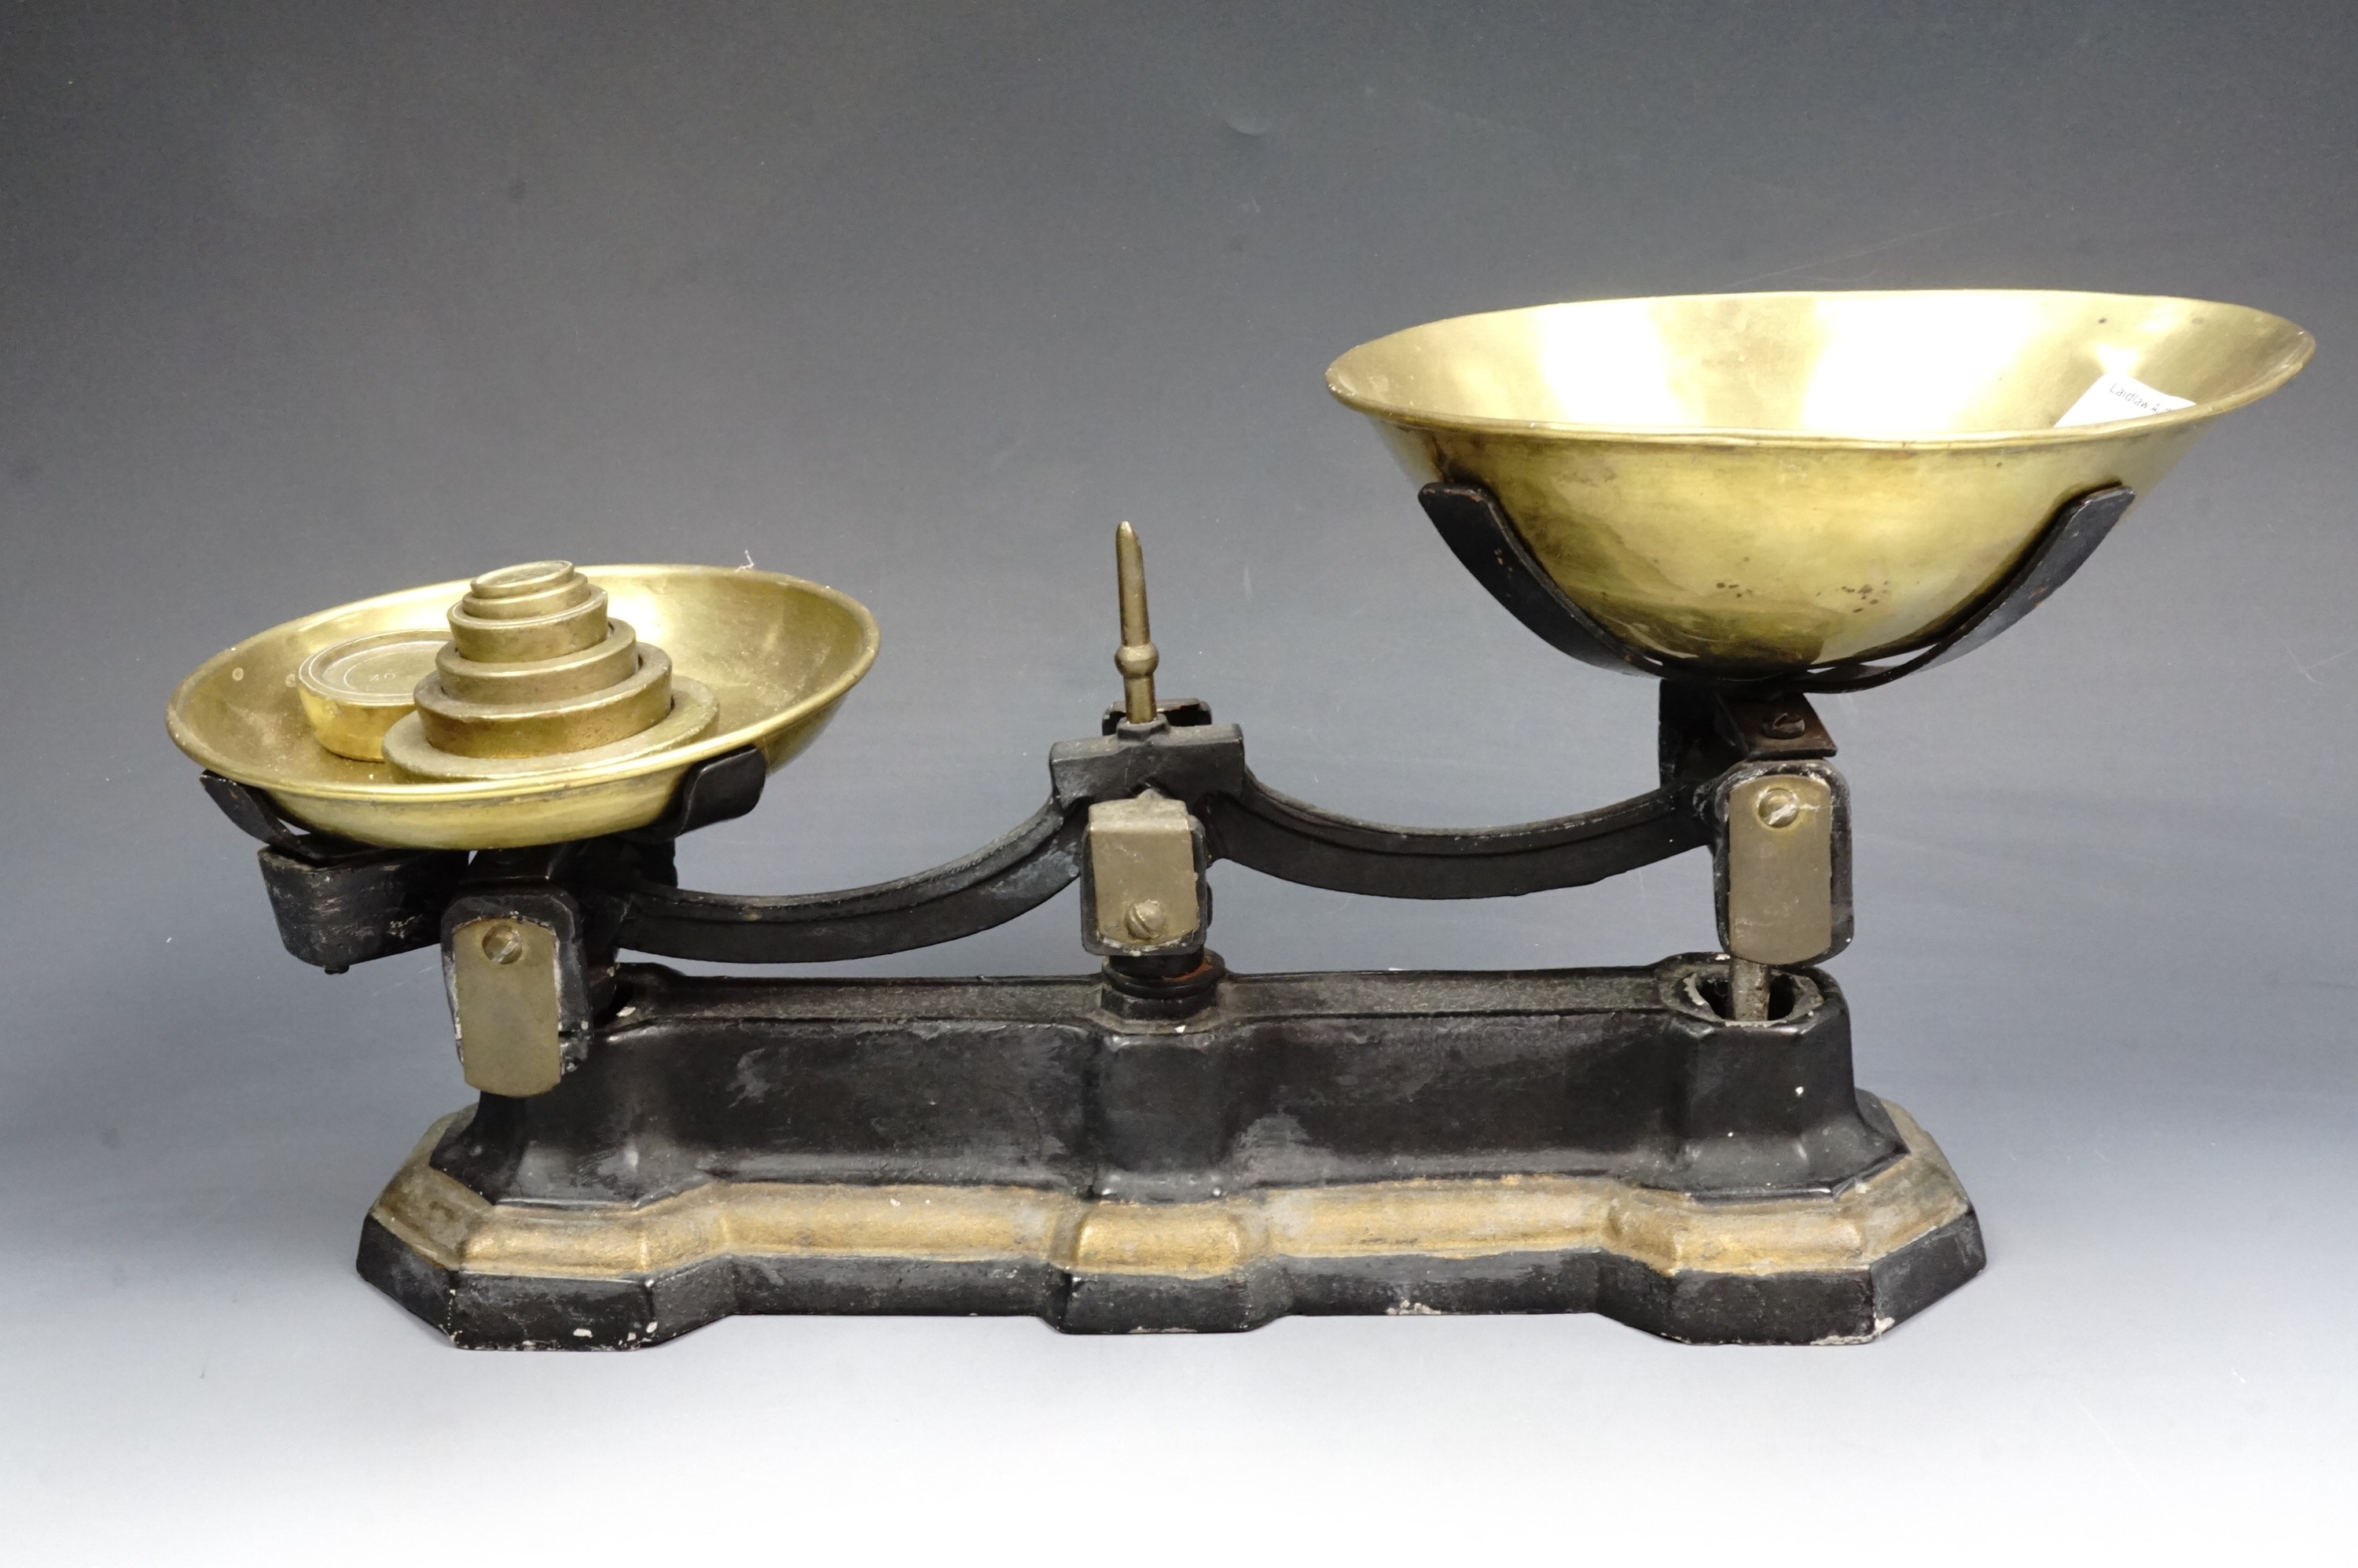 Kitchen scales and brass weights